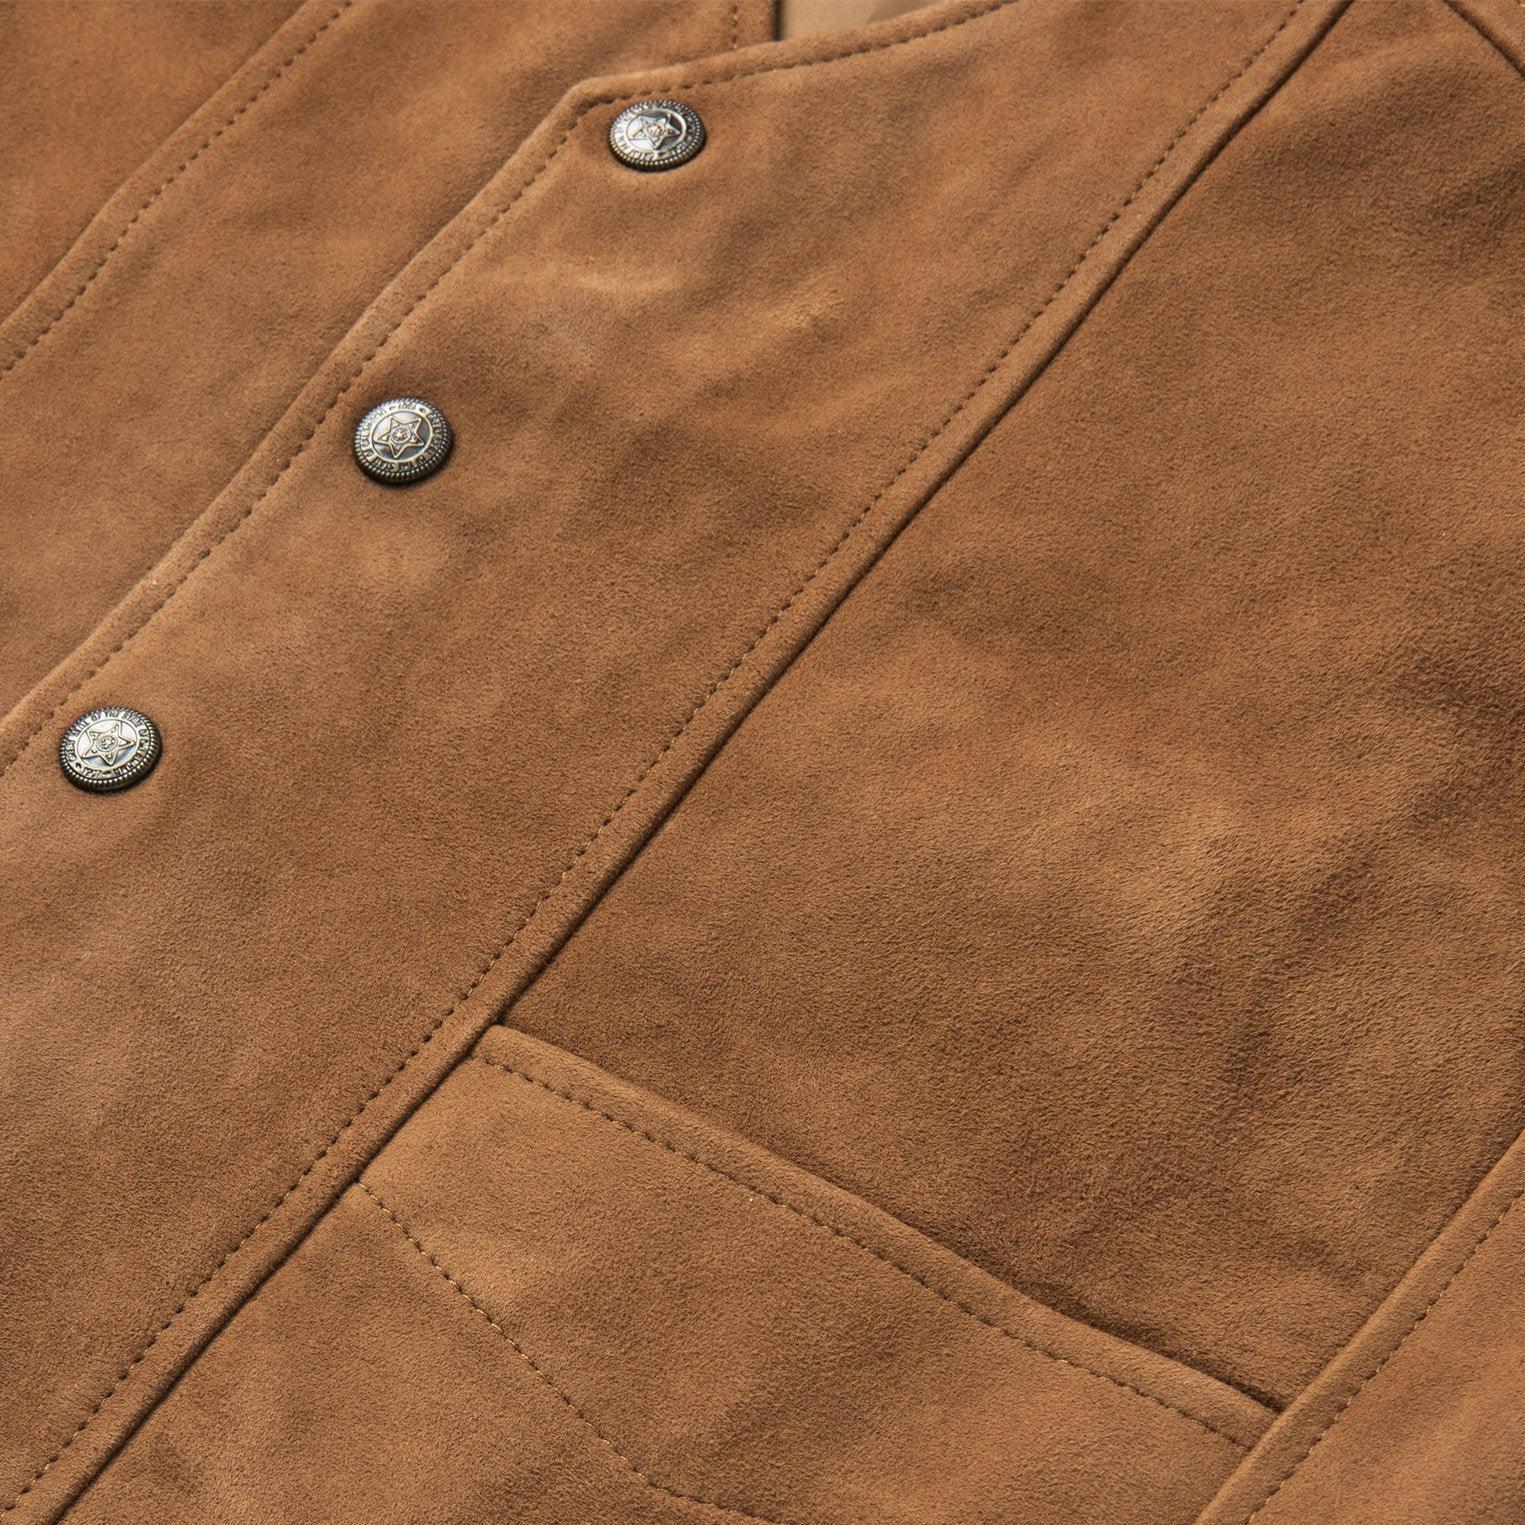 Stetson Suede Leather Snap Front Vest - Flyclothing LLC